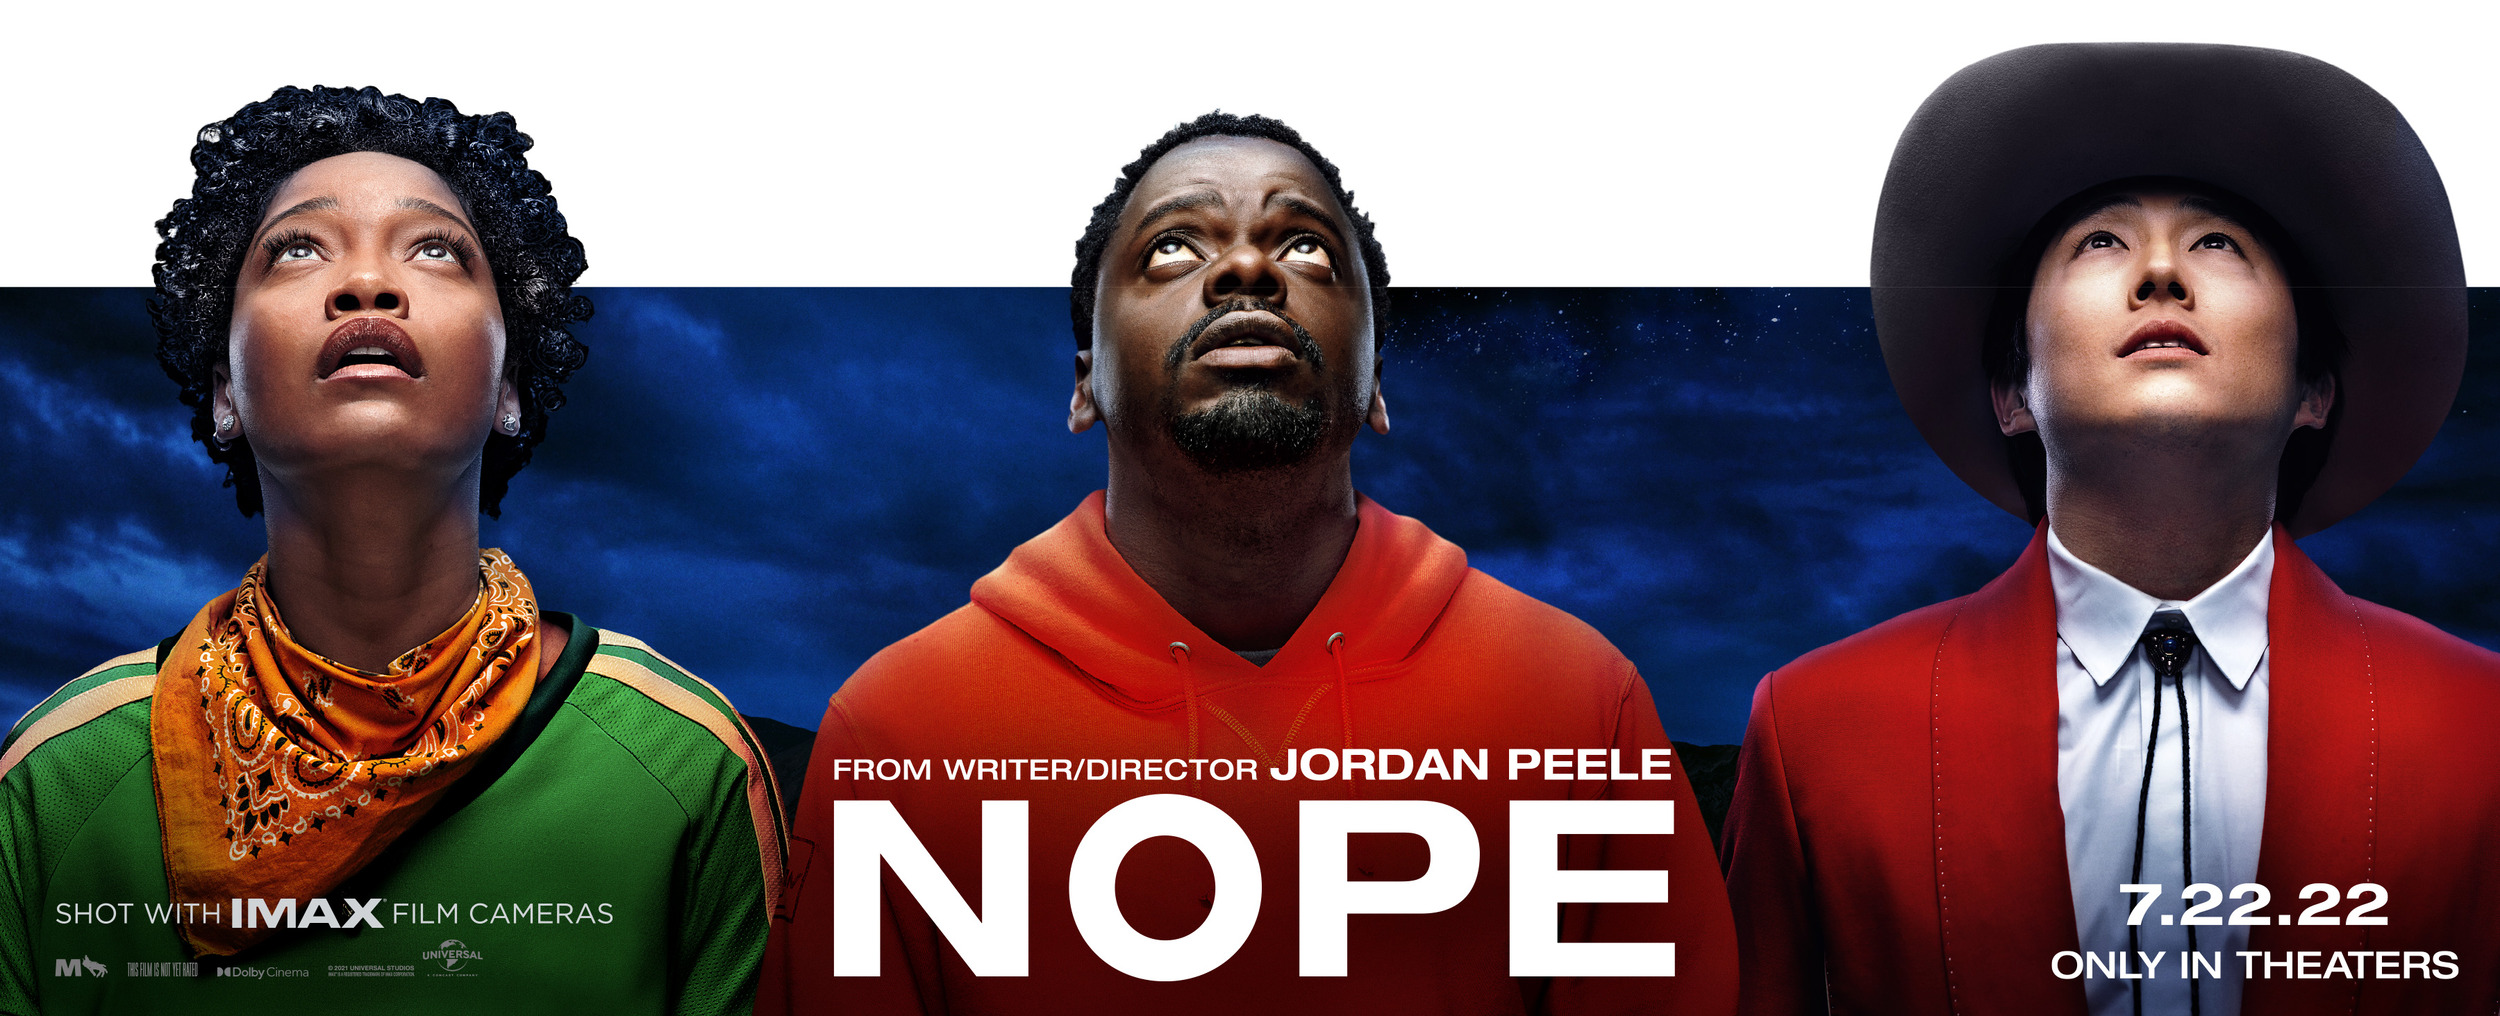 Mega Sized Movie Poster Image for Nope (#14 of 16)